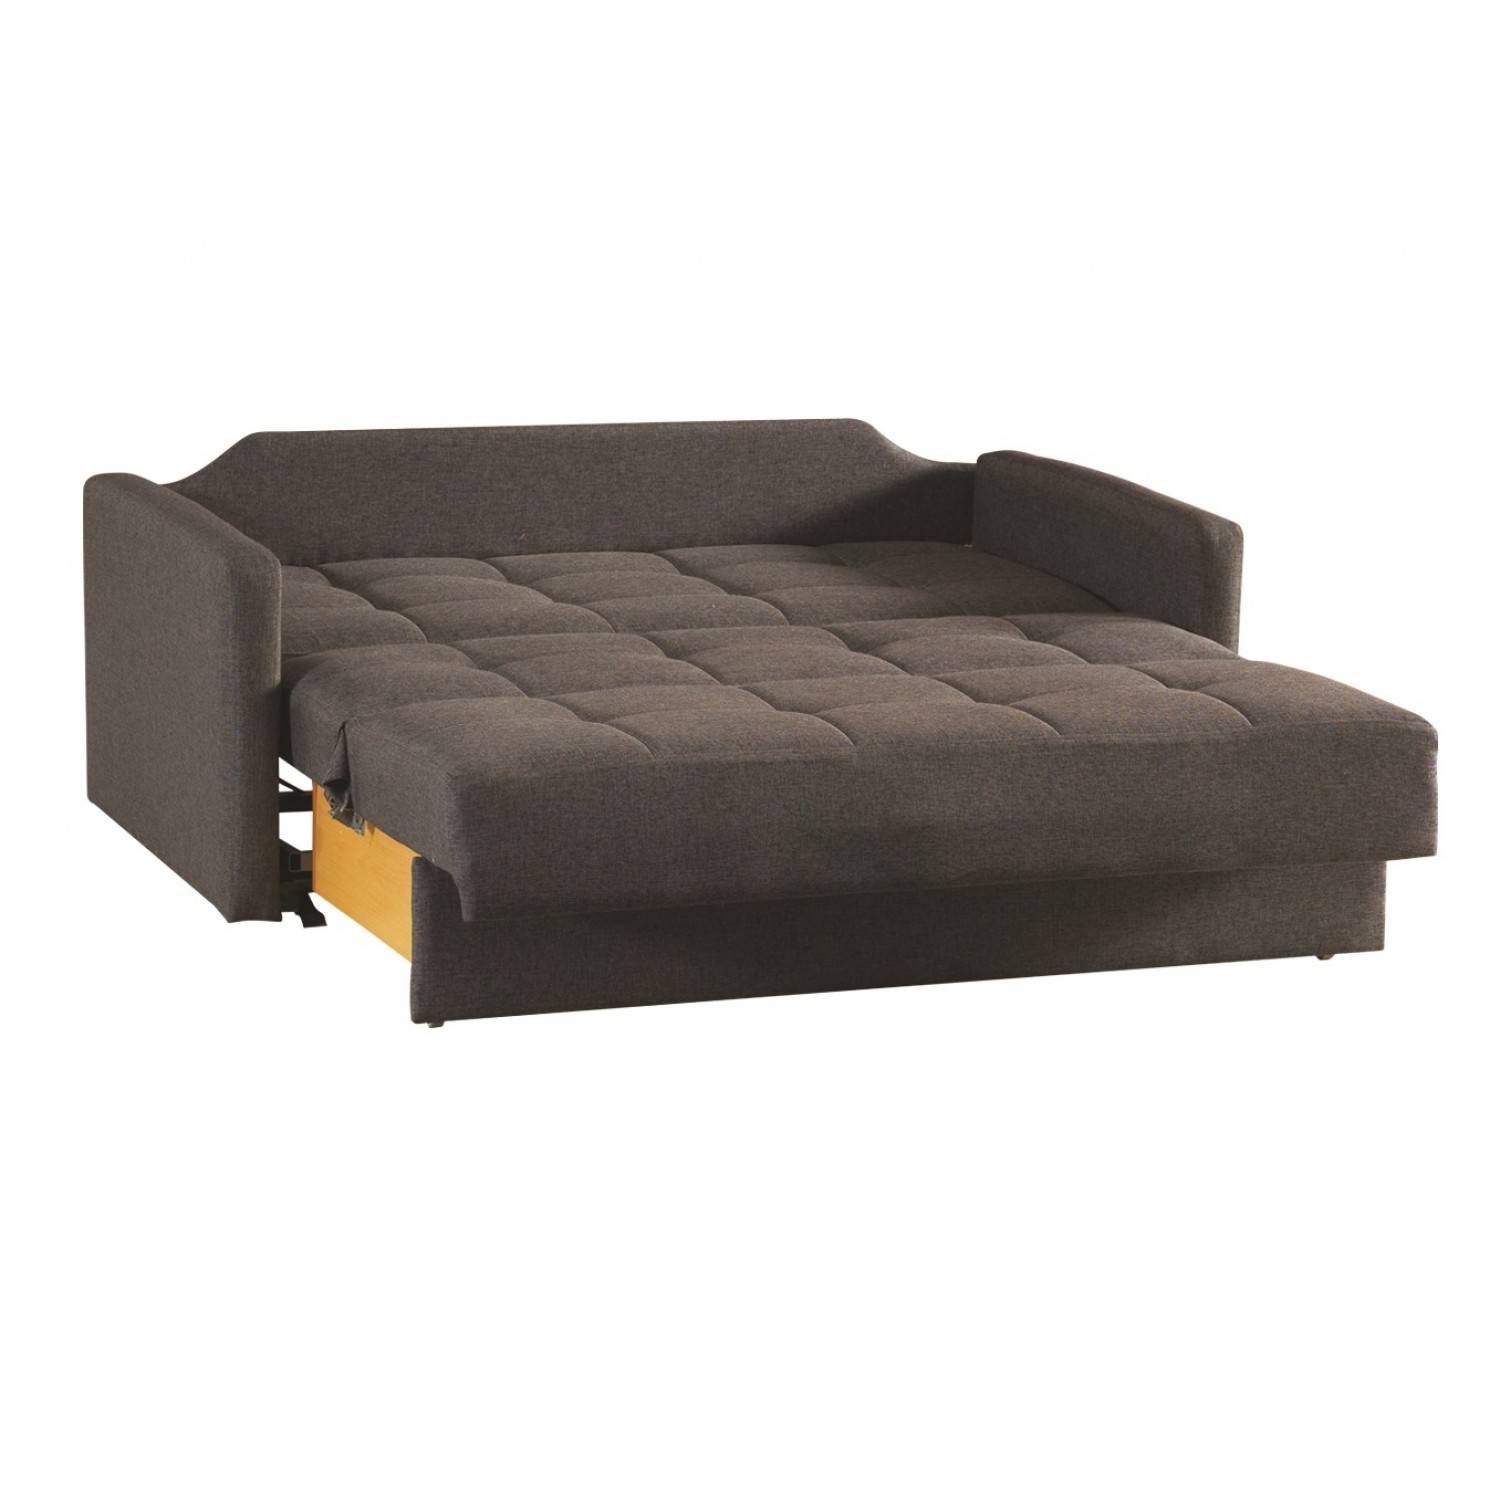 Versatile Modern Sofa Bed For Multifunctional Home Furnishings Throughout Sofa Sleepers Queen Size (View 7 of 30)